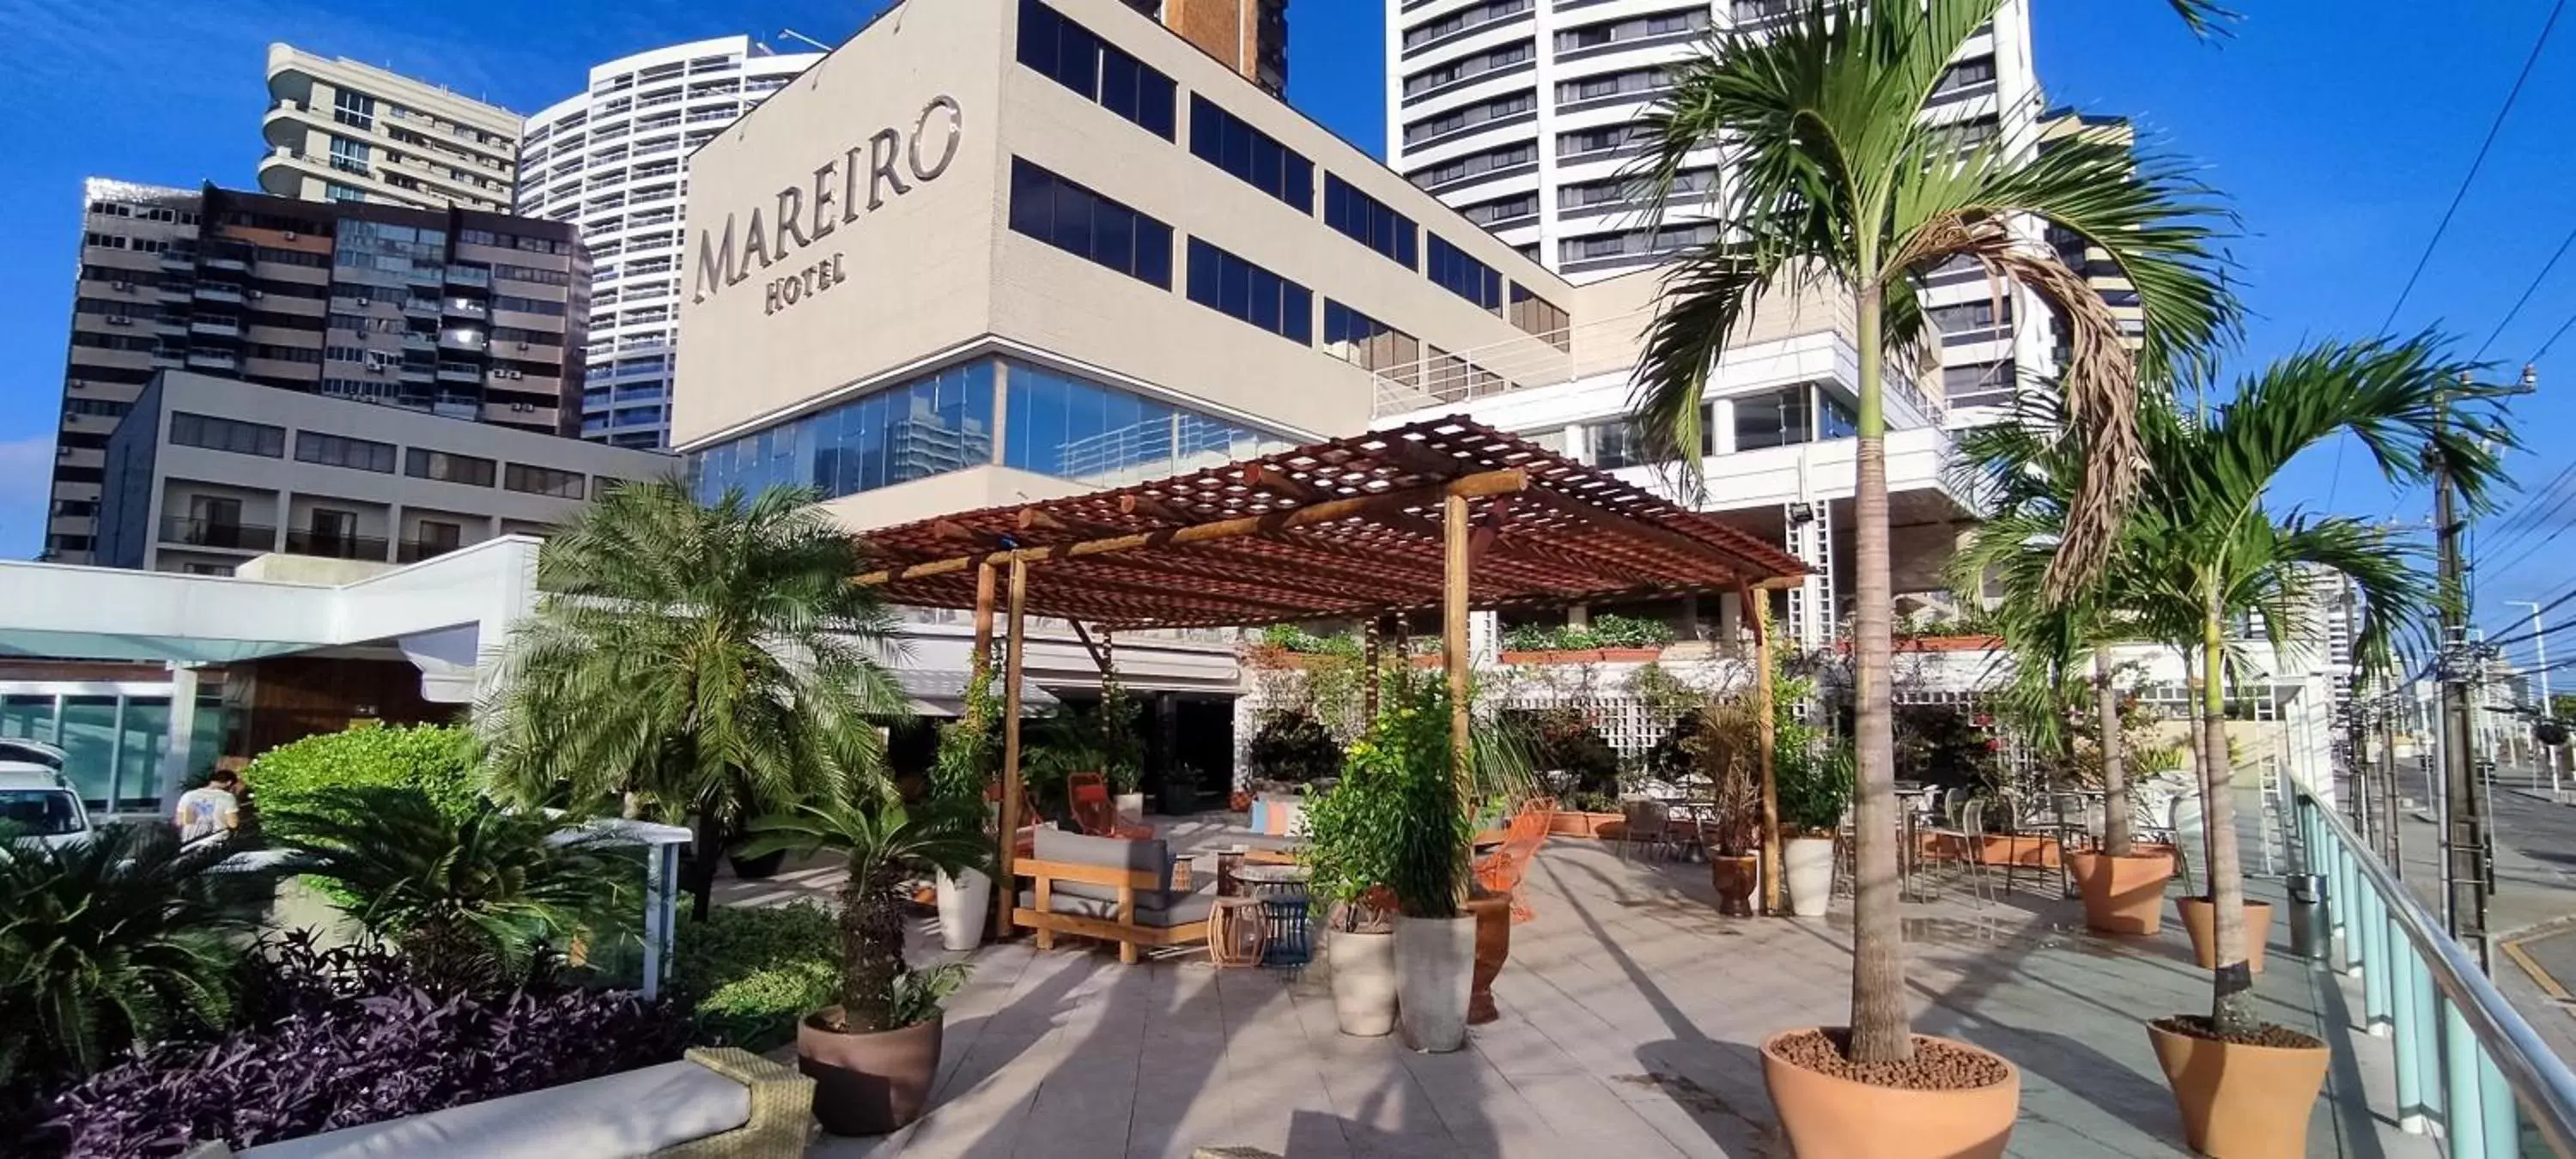 Lounge or bar, Property Building in Mareiro Hotel